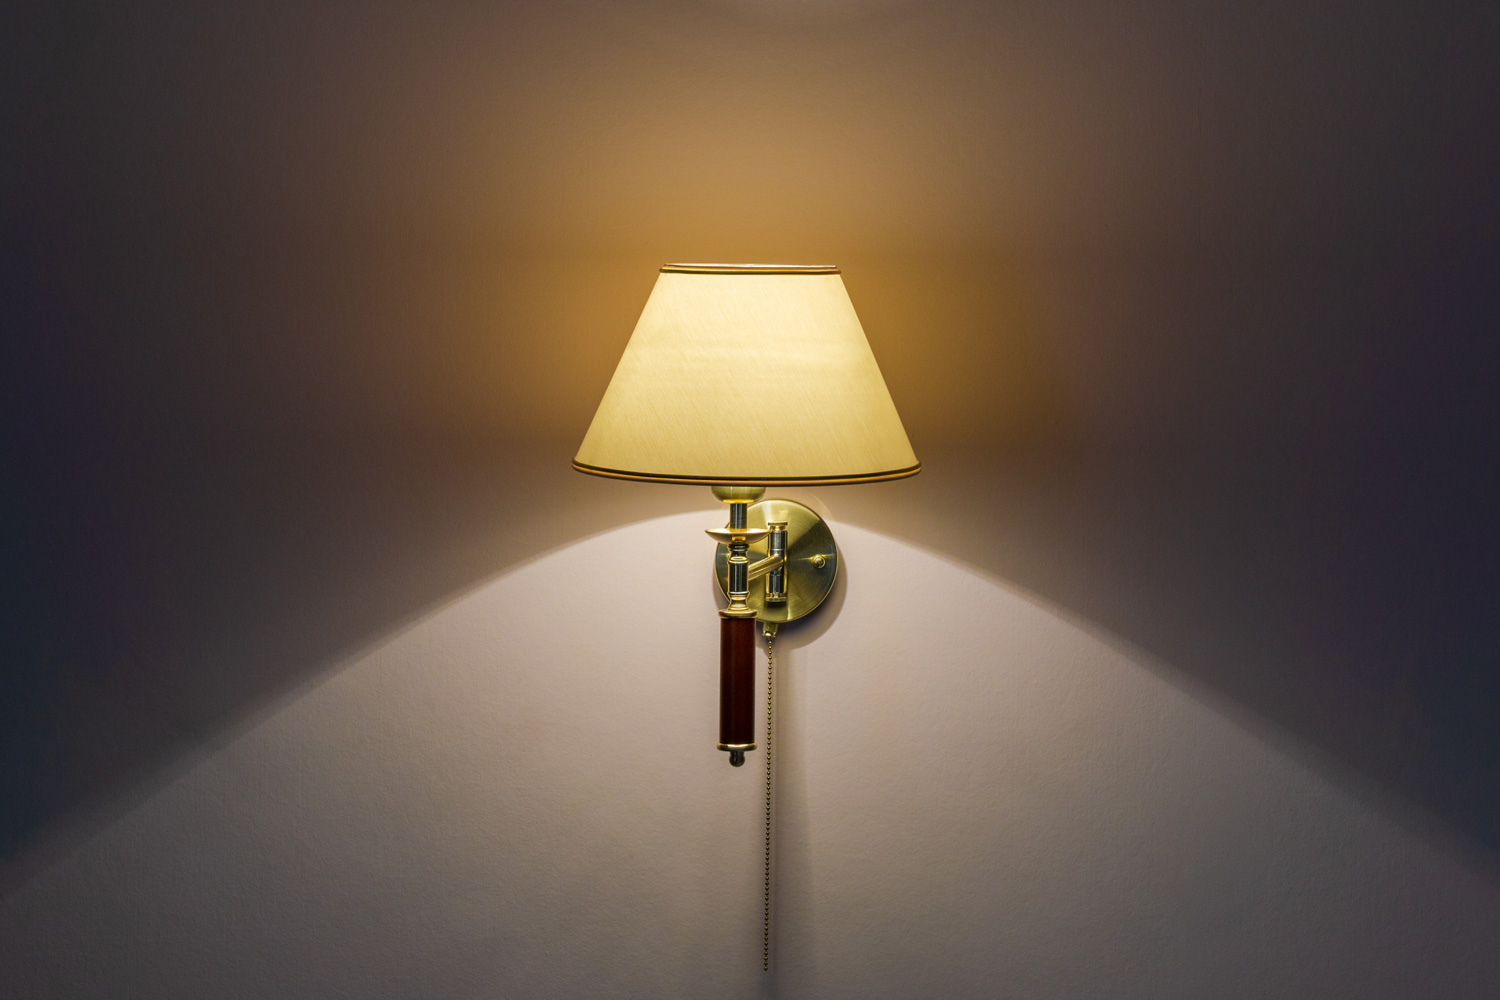 Classic sconce with turned on bulb under lampshade hanging on wall with beige wallpaper.